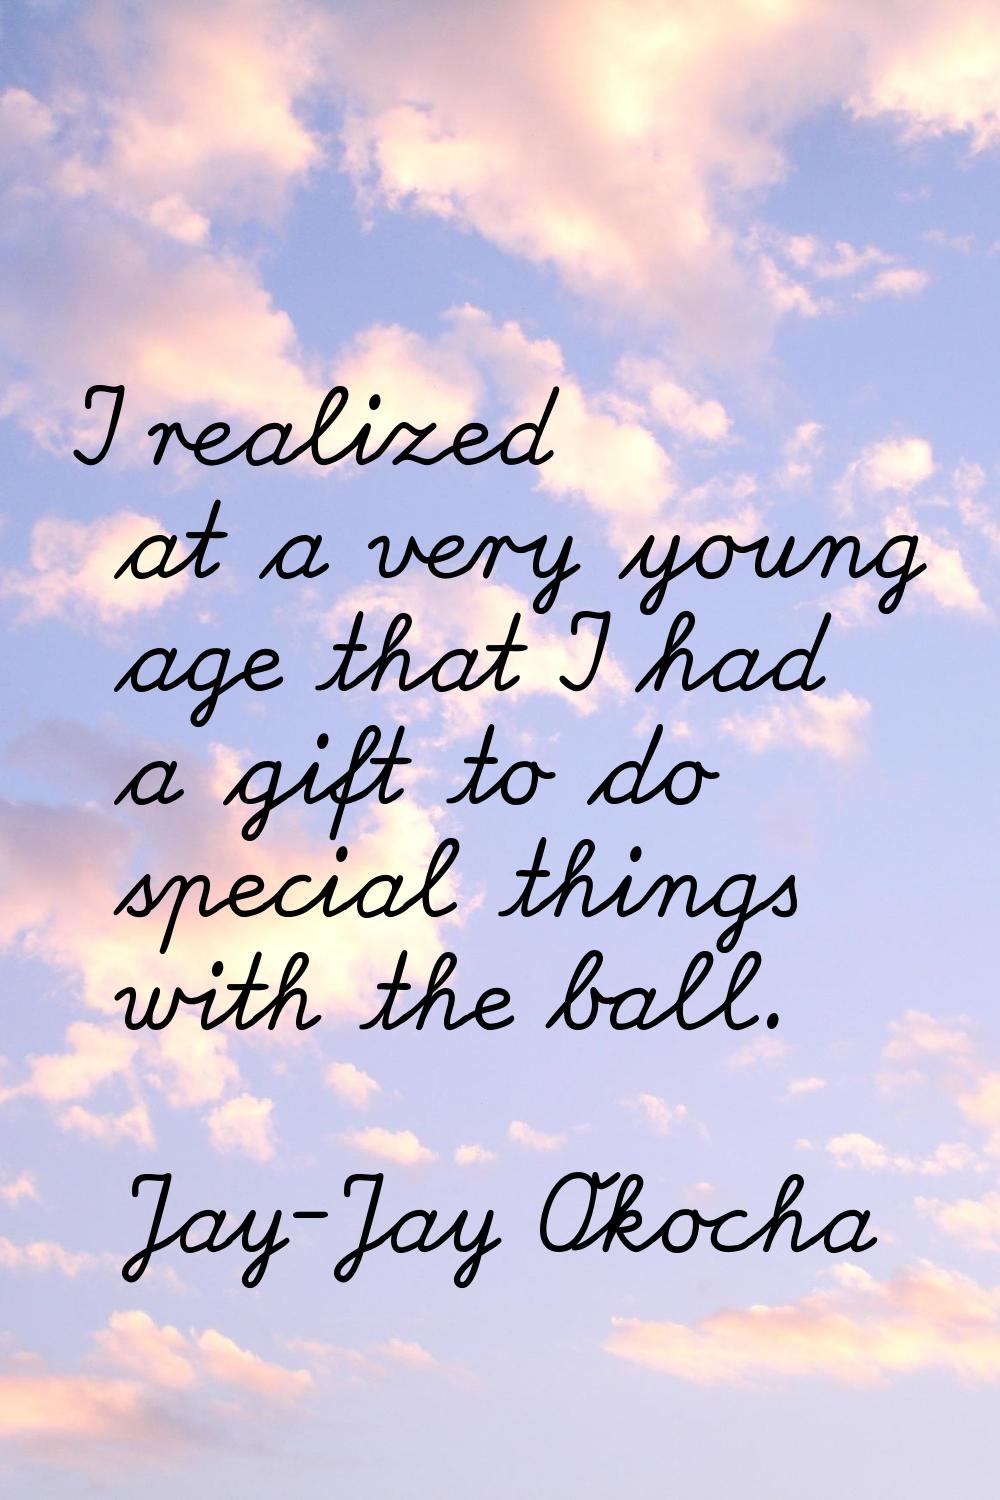 I realized at a very young age that I had a gift to do special things with the ball.